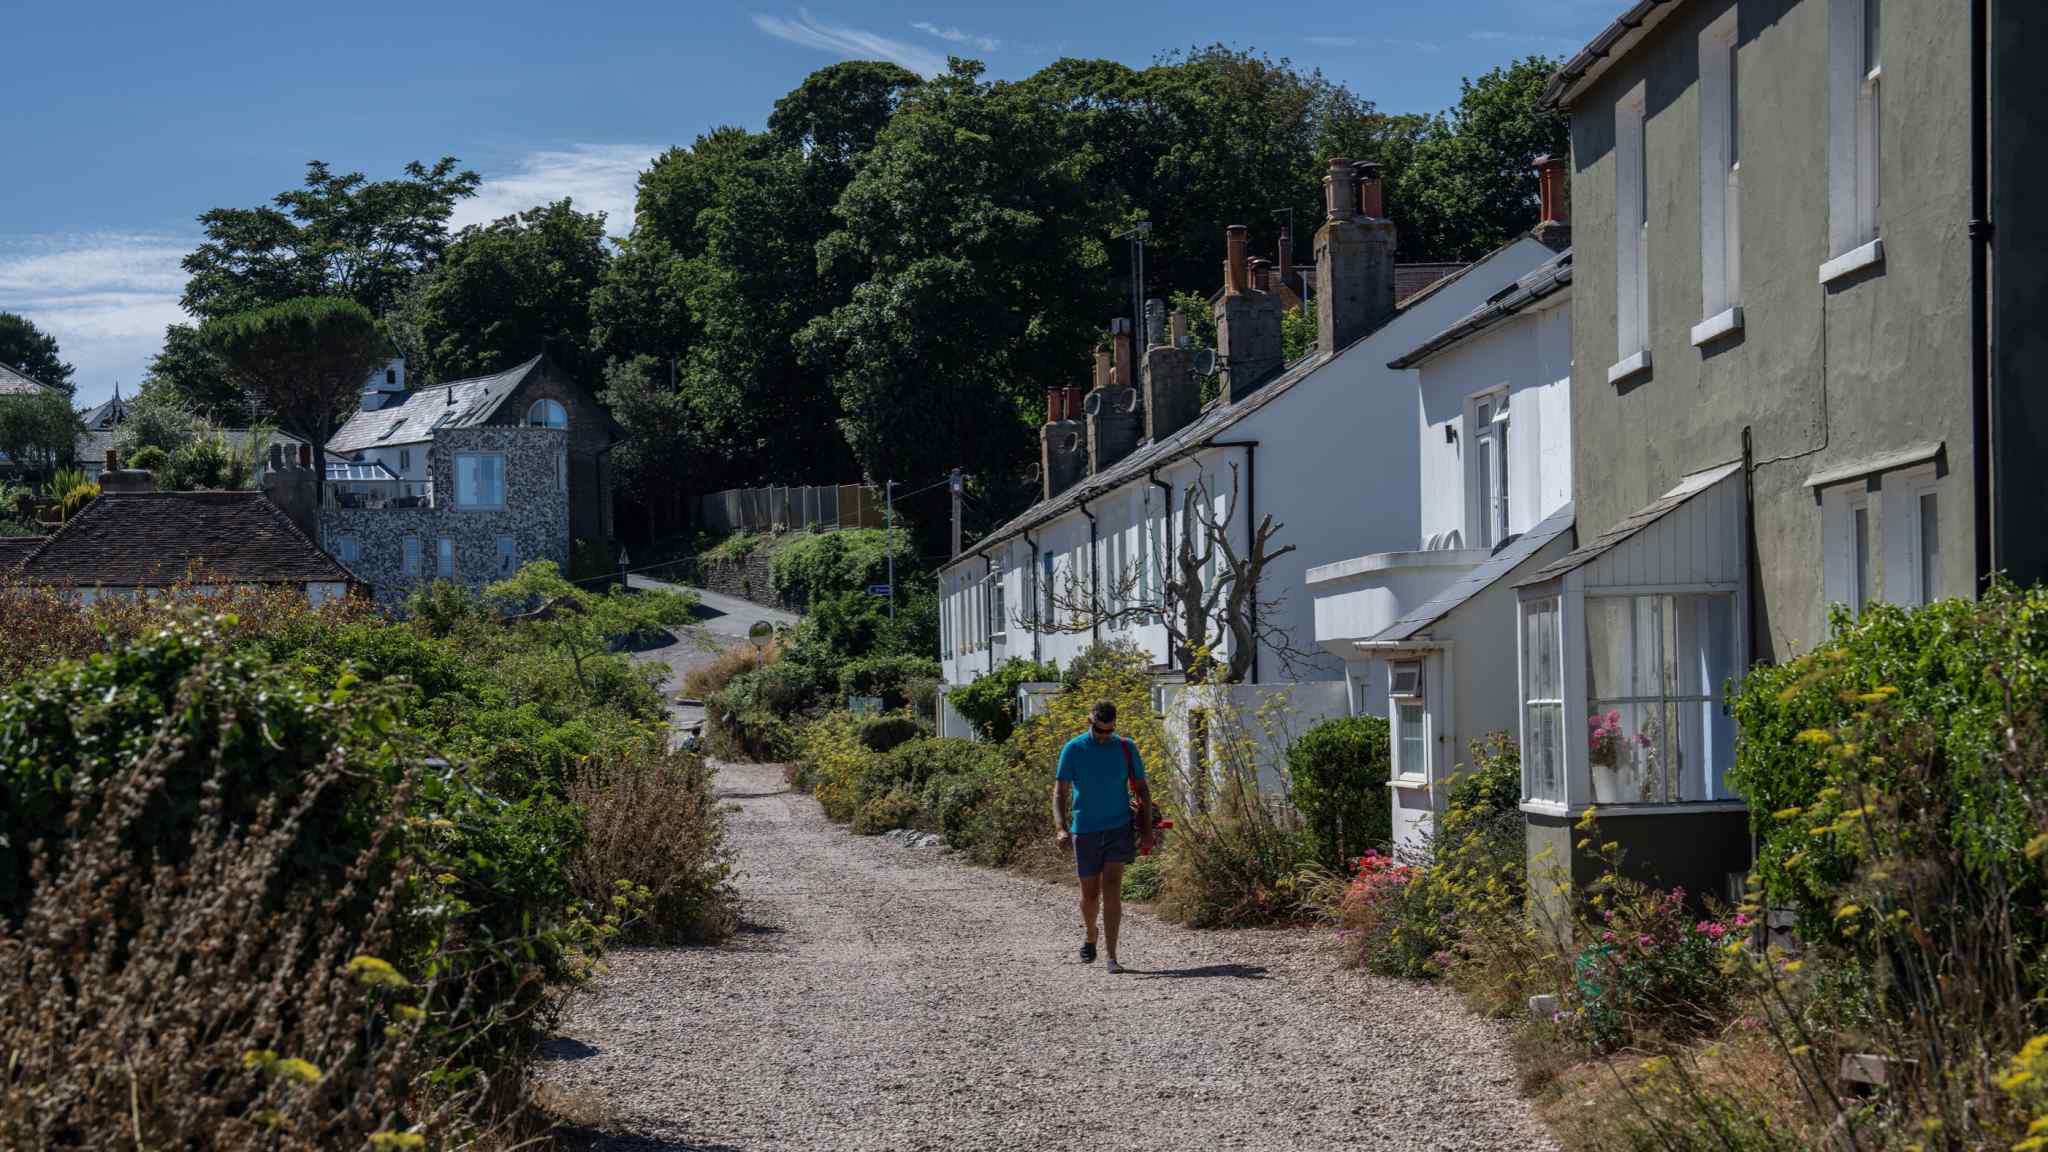 Heatwave leads to surge in housing subsidence claims across southern England